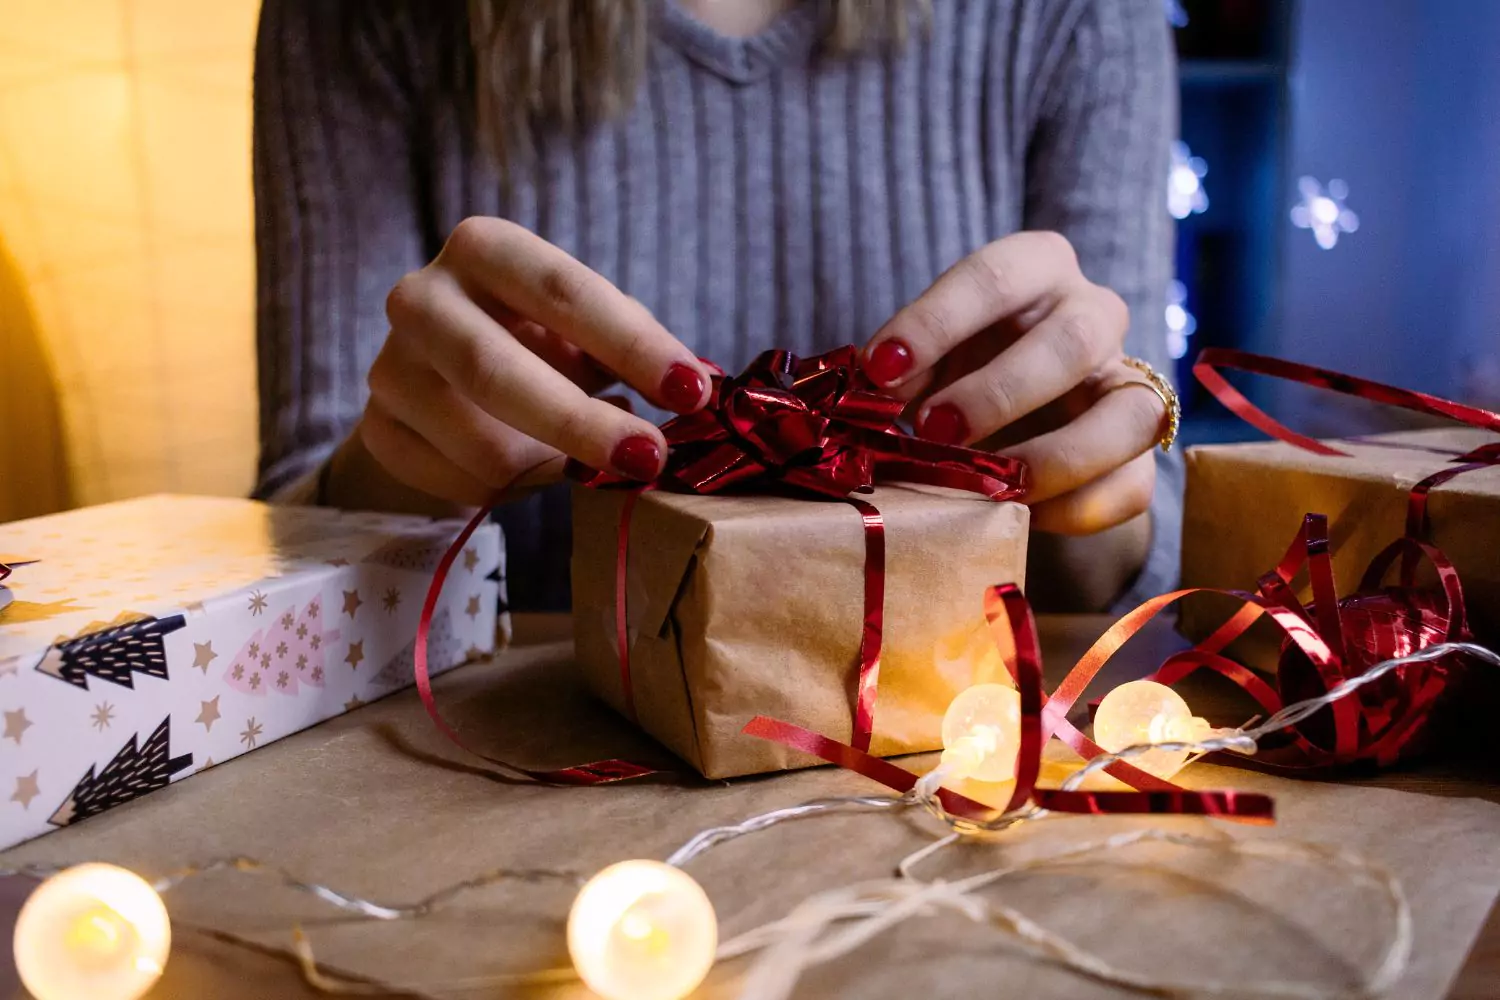 Pack More Meaning Into This Year’s Christmas Gifts  